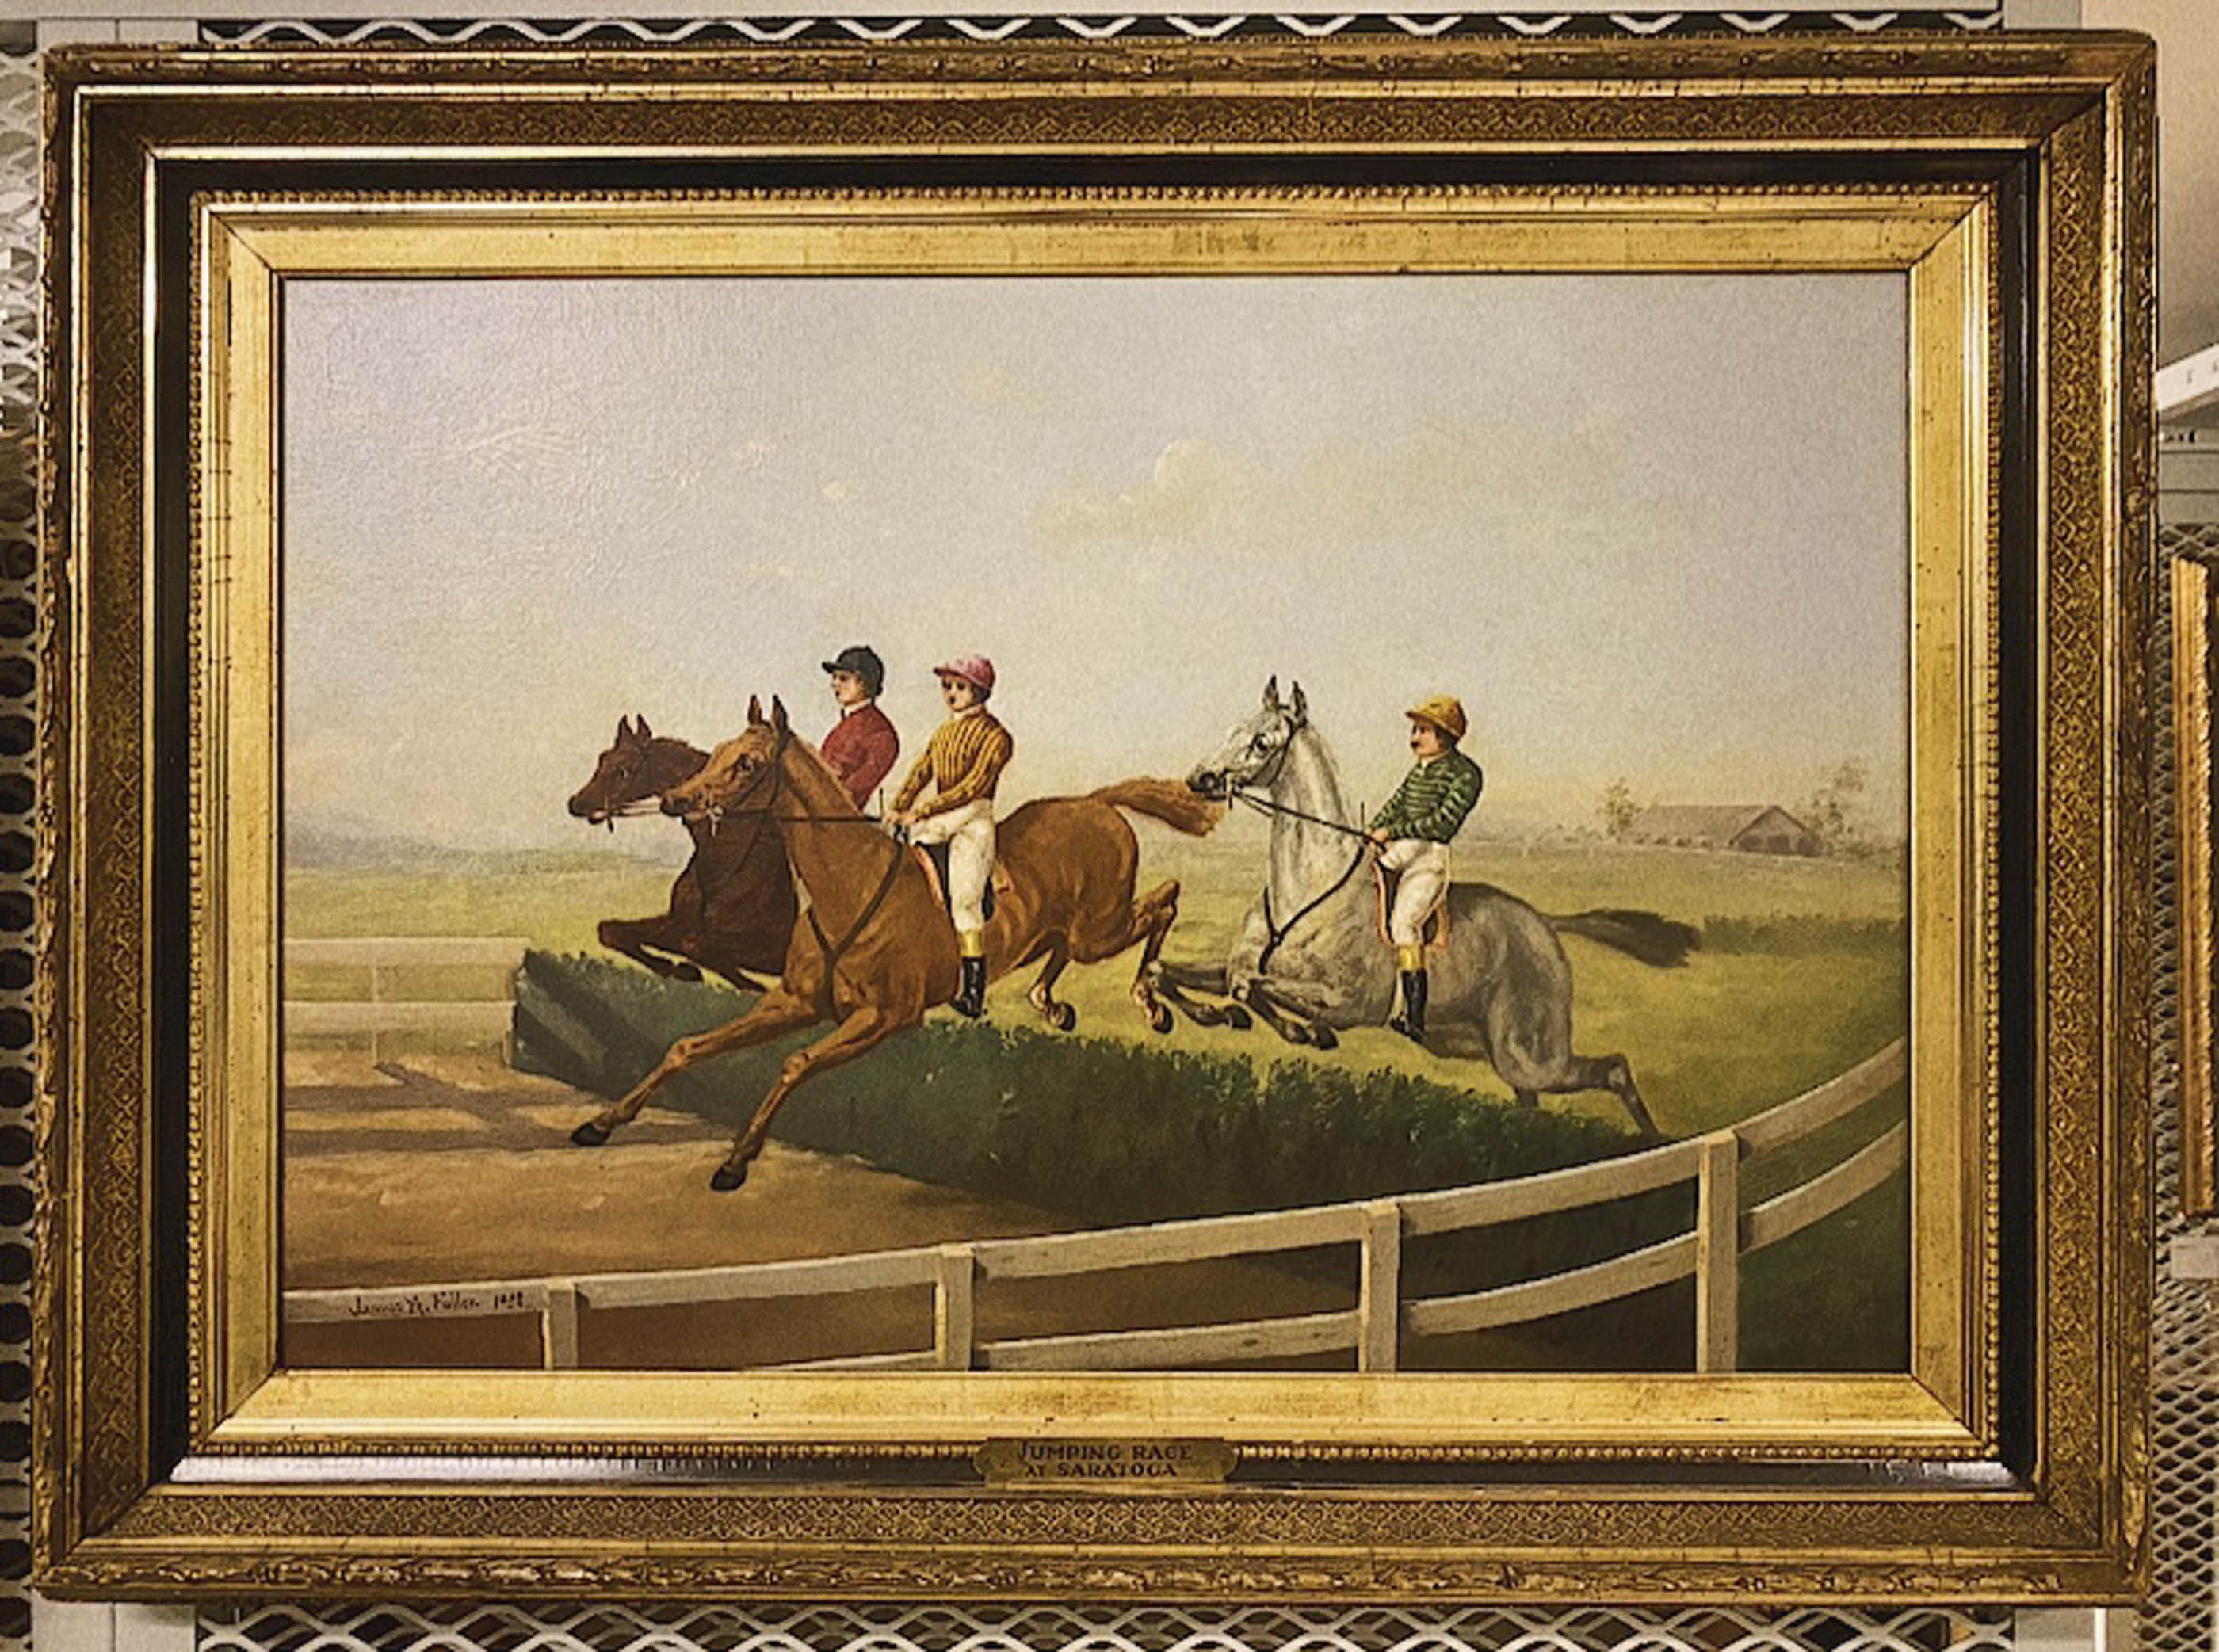 1955.50: Jumping Race at Saratoga by Junius A. Fuller, Oil on canvas, 1882, Gift: Jerome Sayles Hess